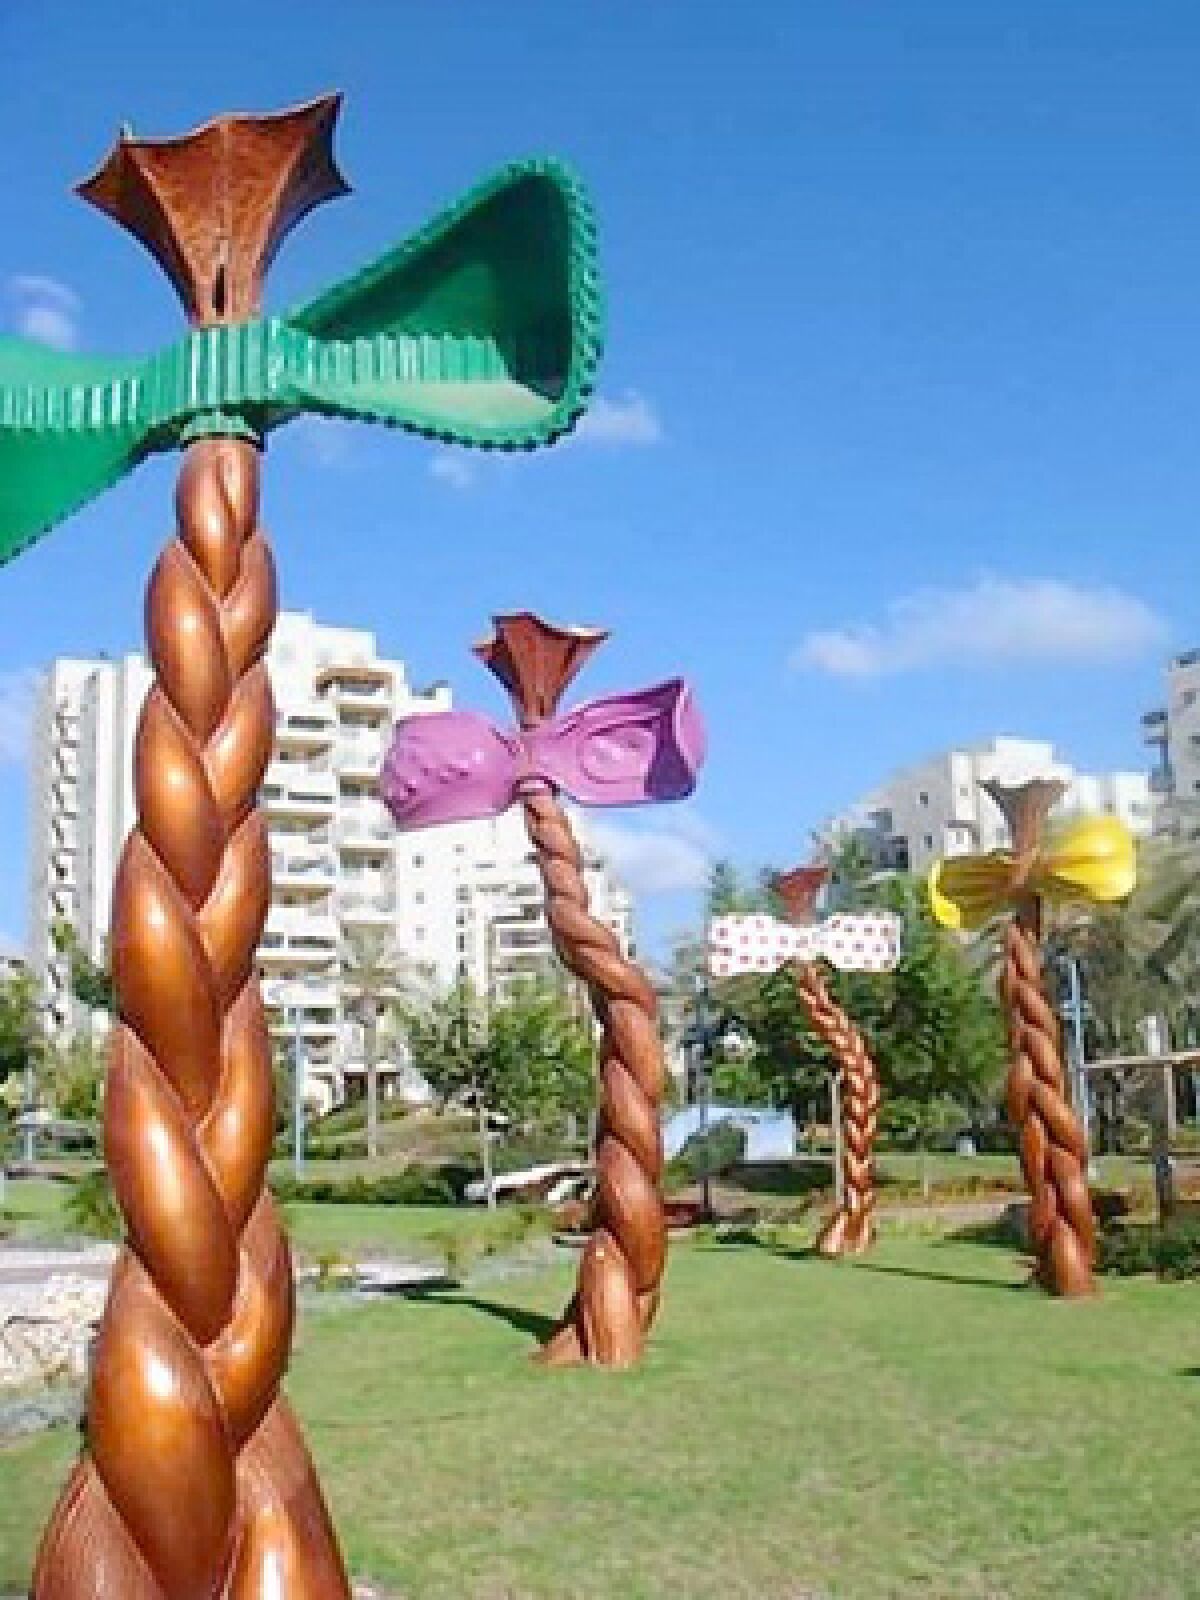 Large sculptures in one of Holon's "Story Gardens," which are public parks that have oversized sculptures that depict famous Israeli fairy tales and children's storie. This one deals with a girl learning to tie her hair in braids.